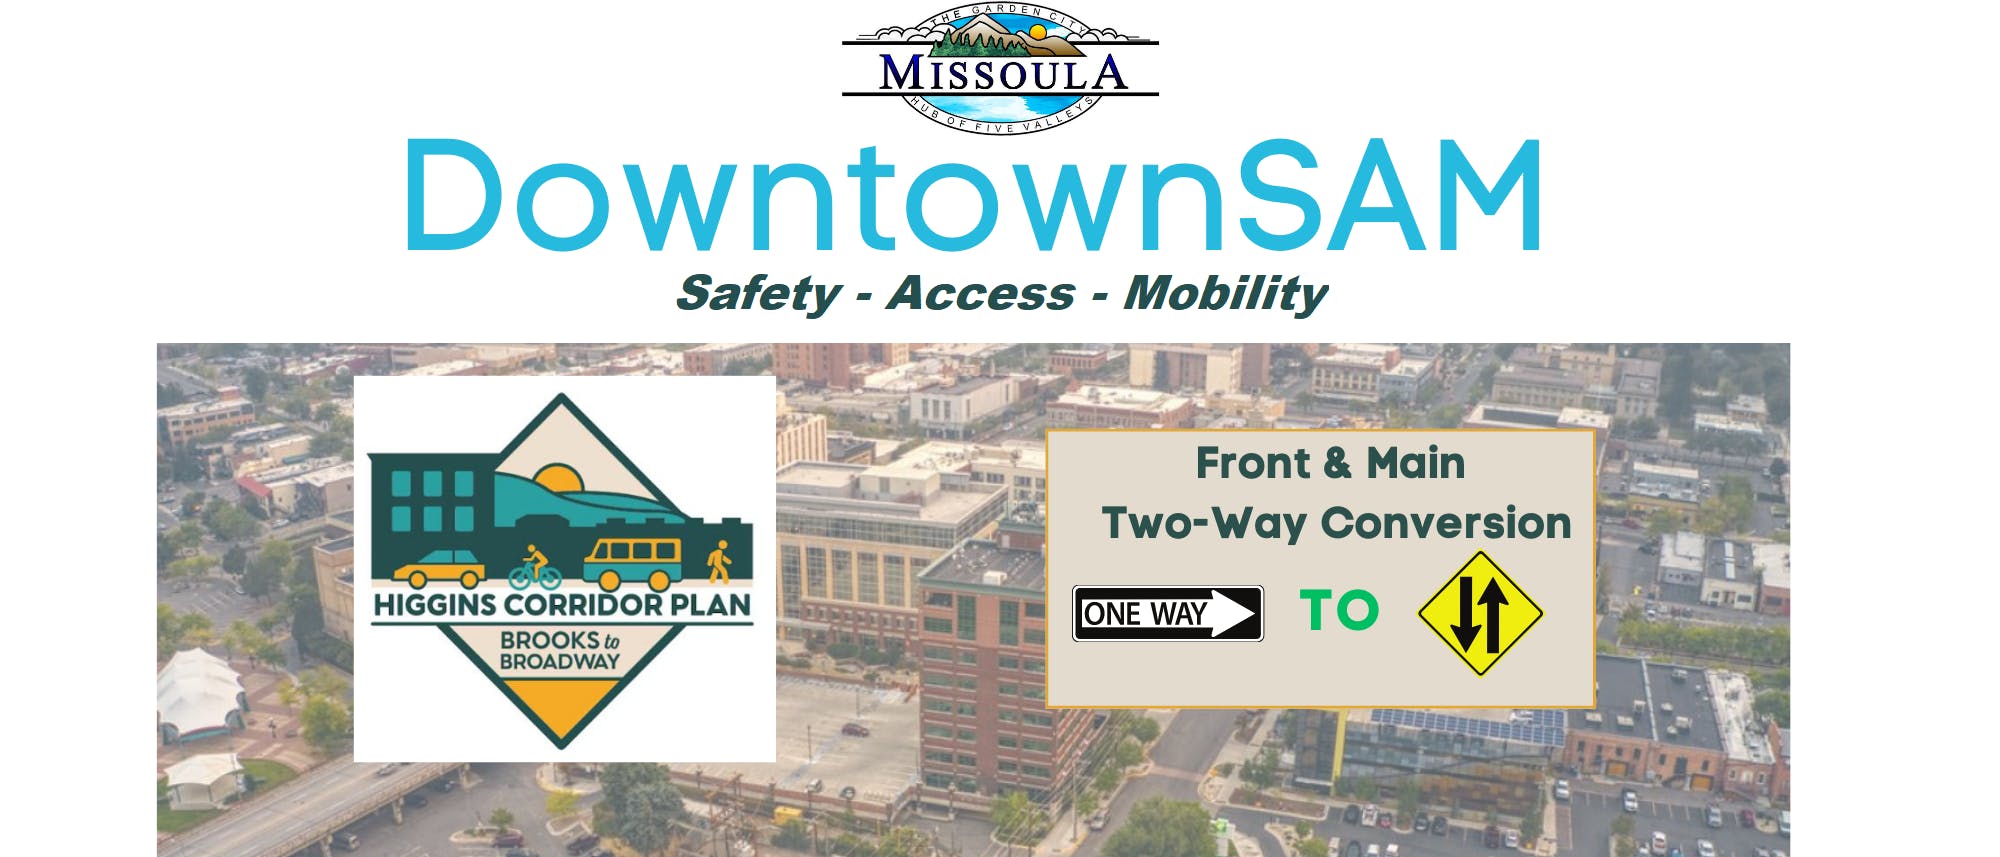 City of Missoula logo & text says Downtown SAM Safety, Access, Mobility & graphics for the Higgins Corridor Plan, Front/Main